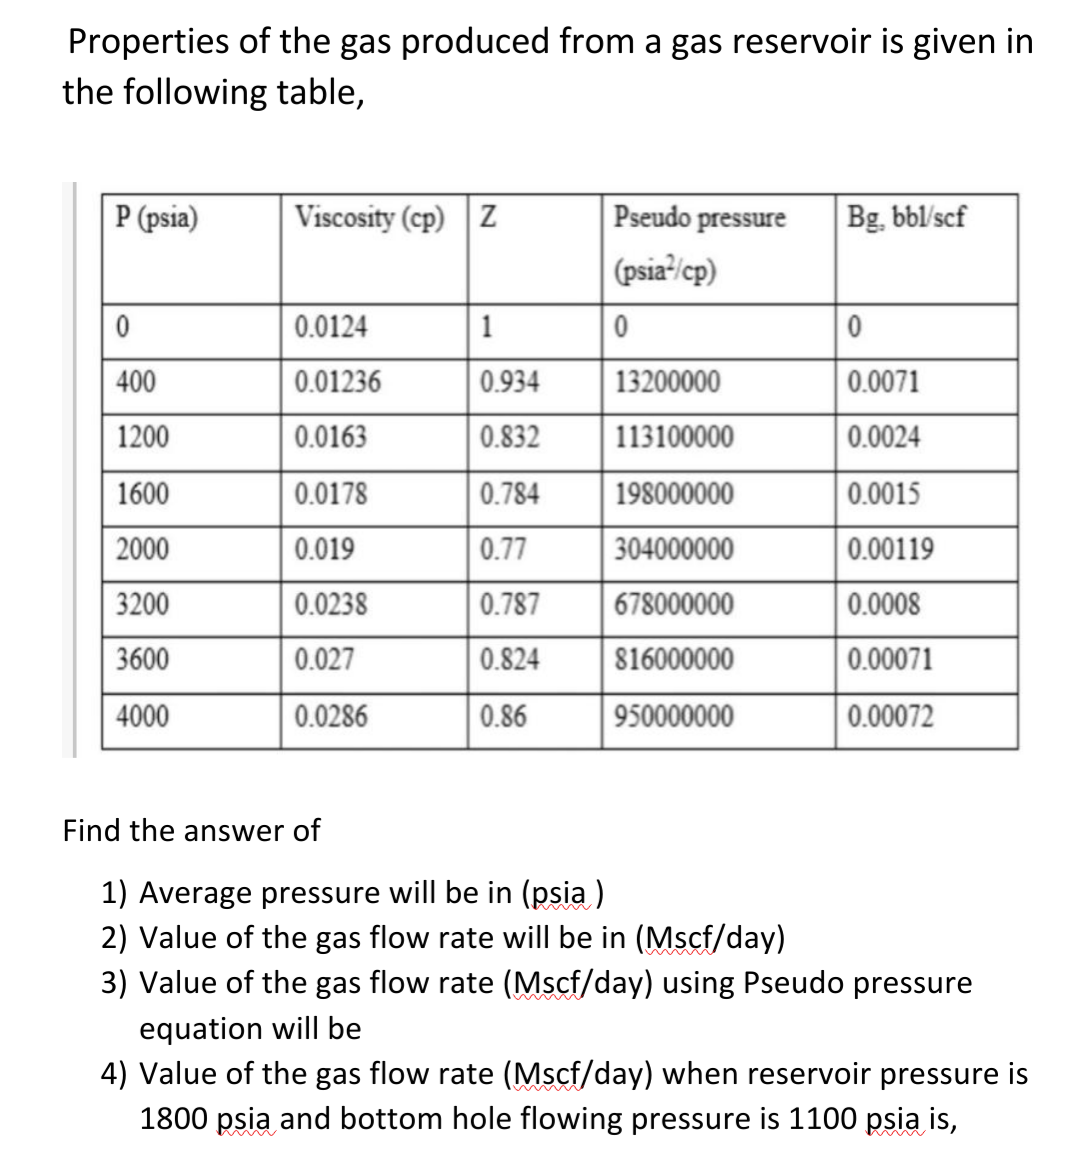 Properties of the gas produced from a gas reservoir is given in
the following table,
P (psia)
Viscosity (cp) Z
Pseudo pressure
Bg, bbl/scf
(psia"/cp)
0.0124
1
400
0.01236
0.934
13200000
0.0071
1200
0.0163
0.832
113100000
0.0024
1600
0.0178
0.784
198000000
0.0015
2000
0.019
0.77
304000000
0.00119
3200
0.0238
0.787
678000000
0.0008
3600
0.027
0.824
816000000
0.00071
4000
0.0286
0.86
950000000
0.00072
Find the answer of
1) Average pressure will be in (psia )
2) Value of the gas flow rate will be in (Mscf/day)
3) Value of the gas flow rate (Mscf/day) using Pseudo pressure
equation will be
4) Value of the gas flow rate (Mscf/day) when reservoir pressure is
1800 psia and bottom hole flowing pressure is 1100 psia is,
